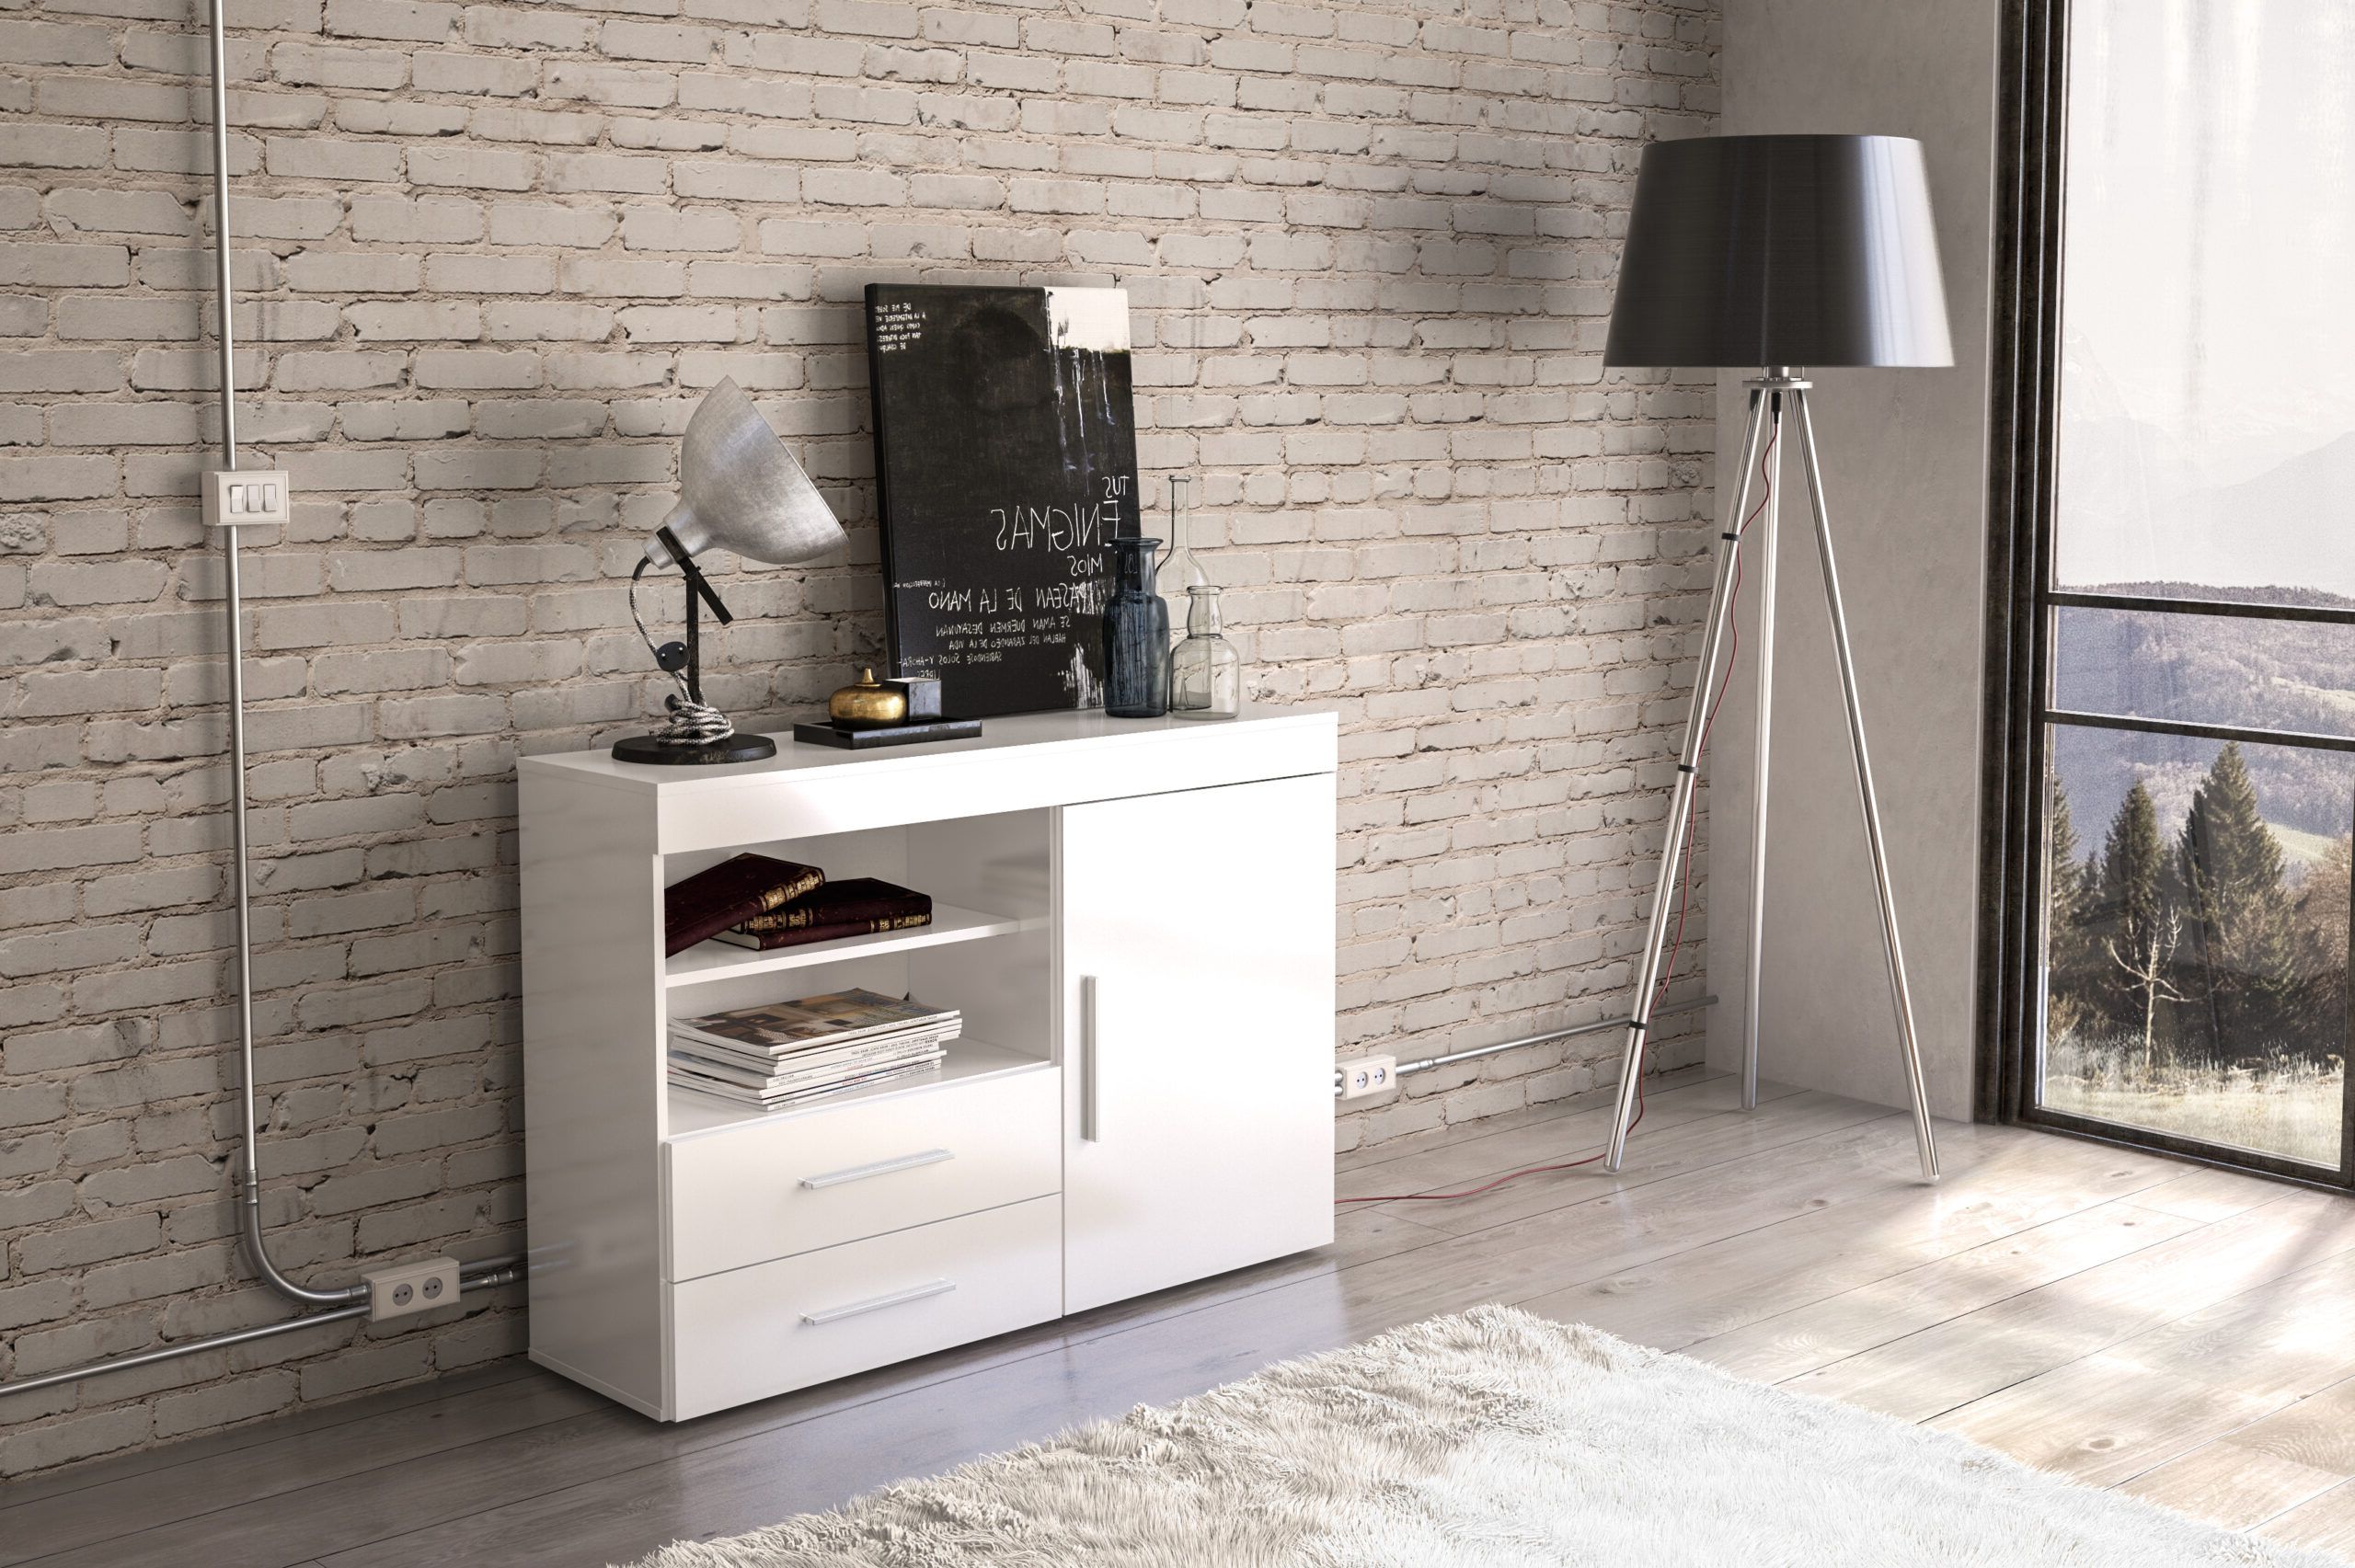 Edgeware 1 Door 2 Drawer Sideboard White – Niture Uk Intended For Most Recent Edgeware Tv Stands (View 10 of 25)